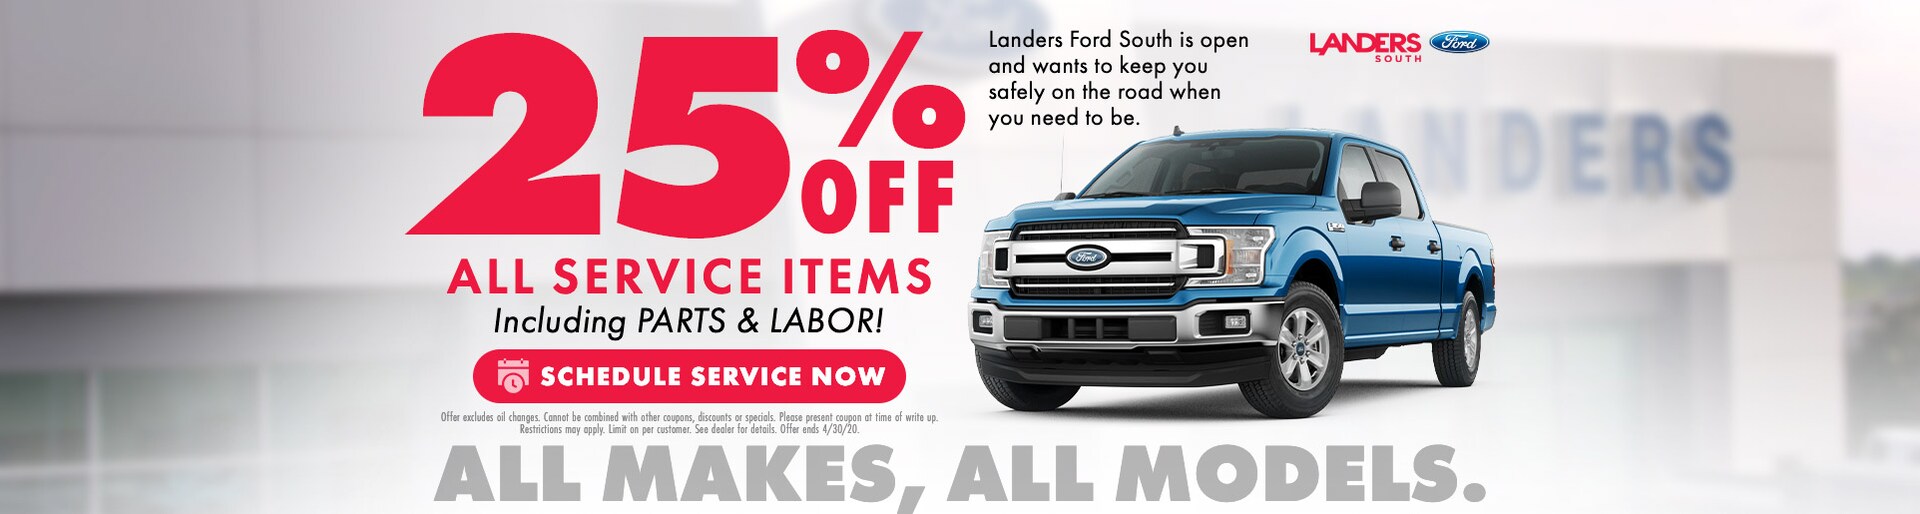 Landers Ford South Ford Dealership In Southaven Ms